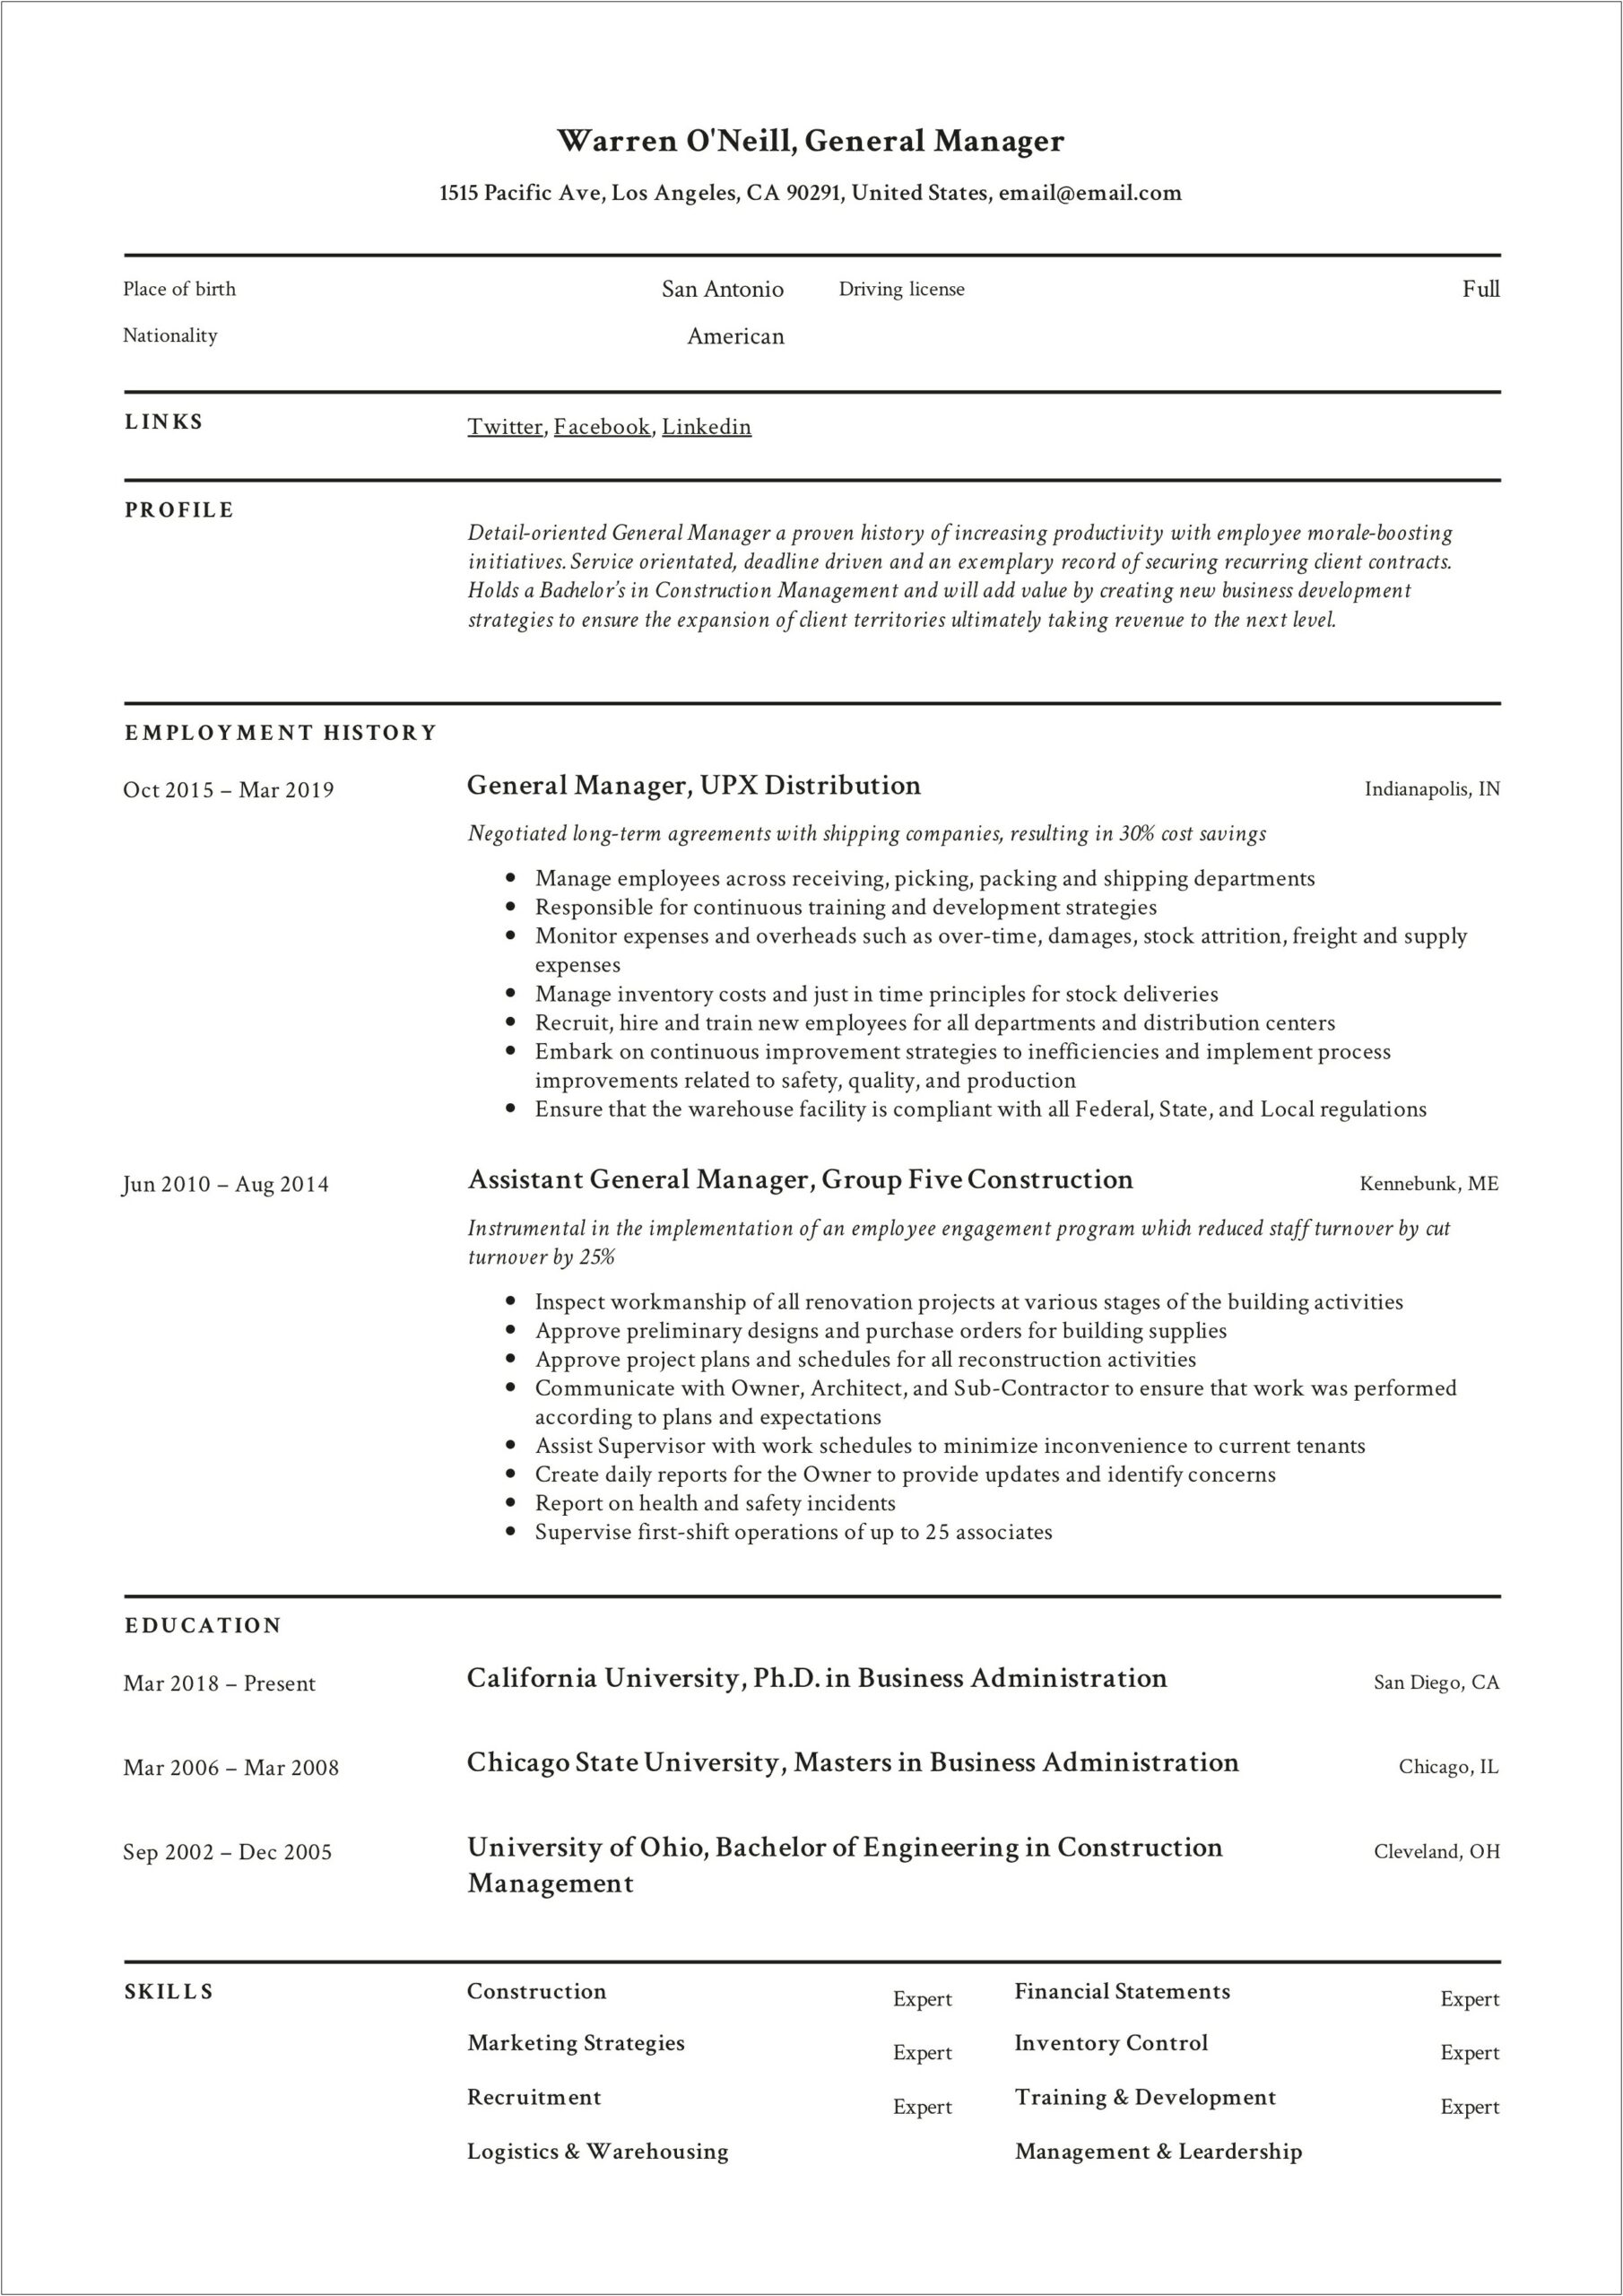 Resume For General Manager At Rent A Center